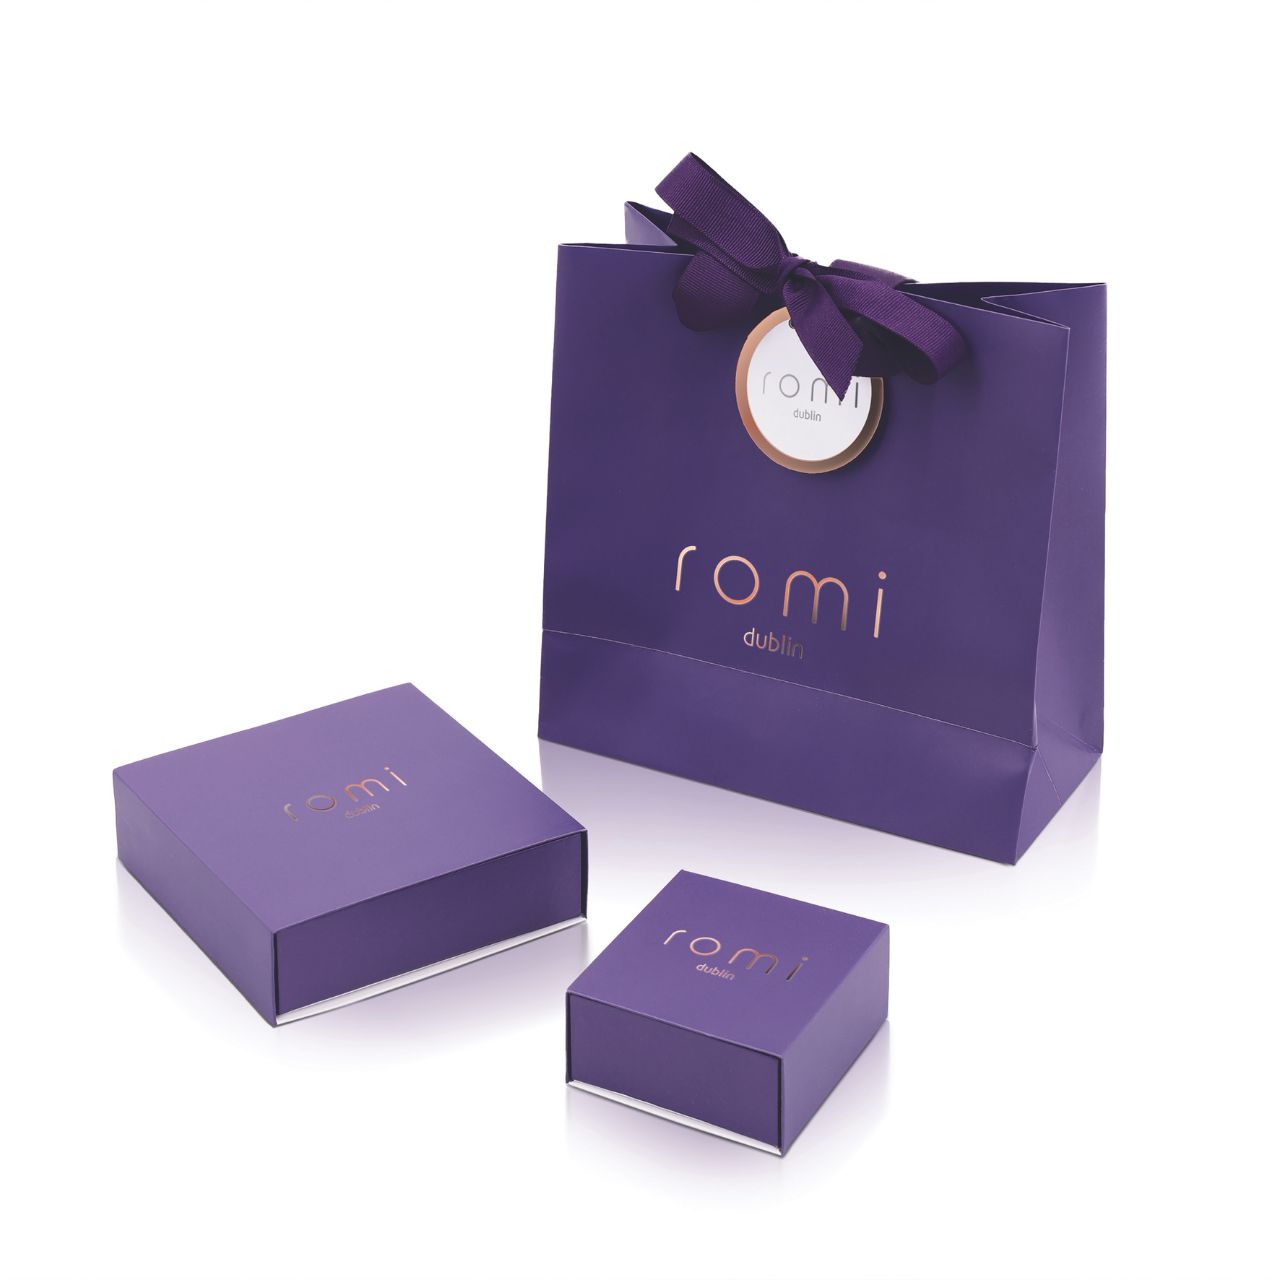 Romi Dublin Silver Curb Chain Bracelet  This easy-to-wear jewellery collection was inspired by daughter Romi who loves to style and accessorise. An outfit isn’t complete until the perfect pieces of jewellery and accessories have been selected to enhance it.